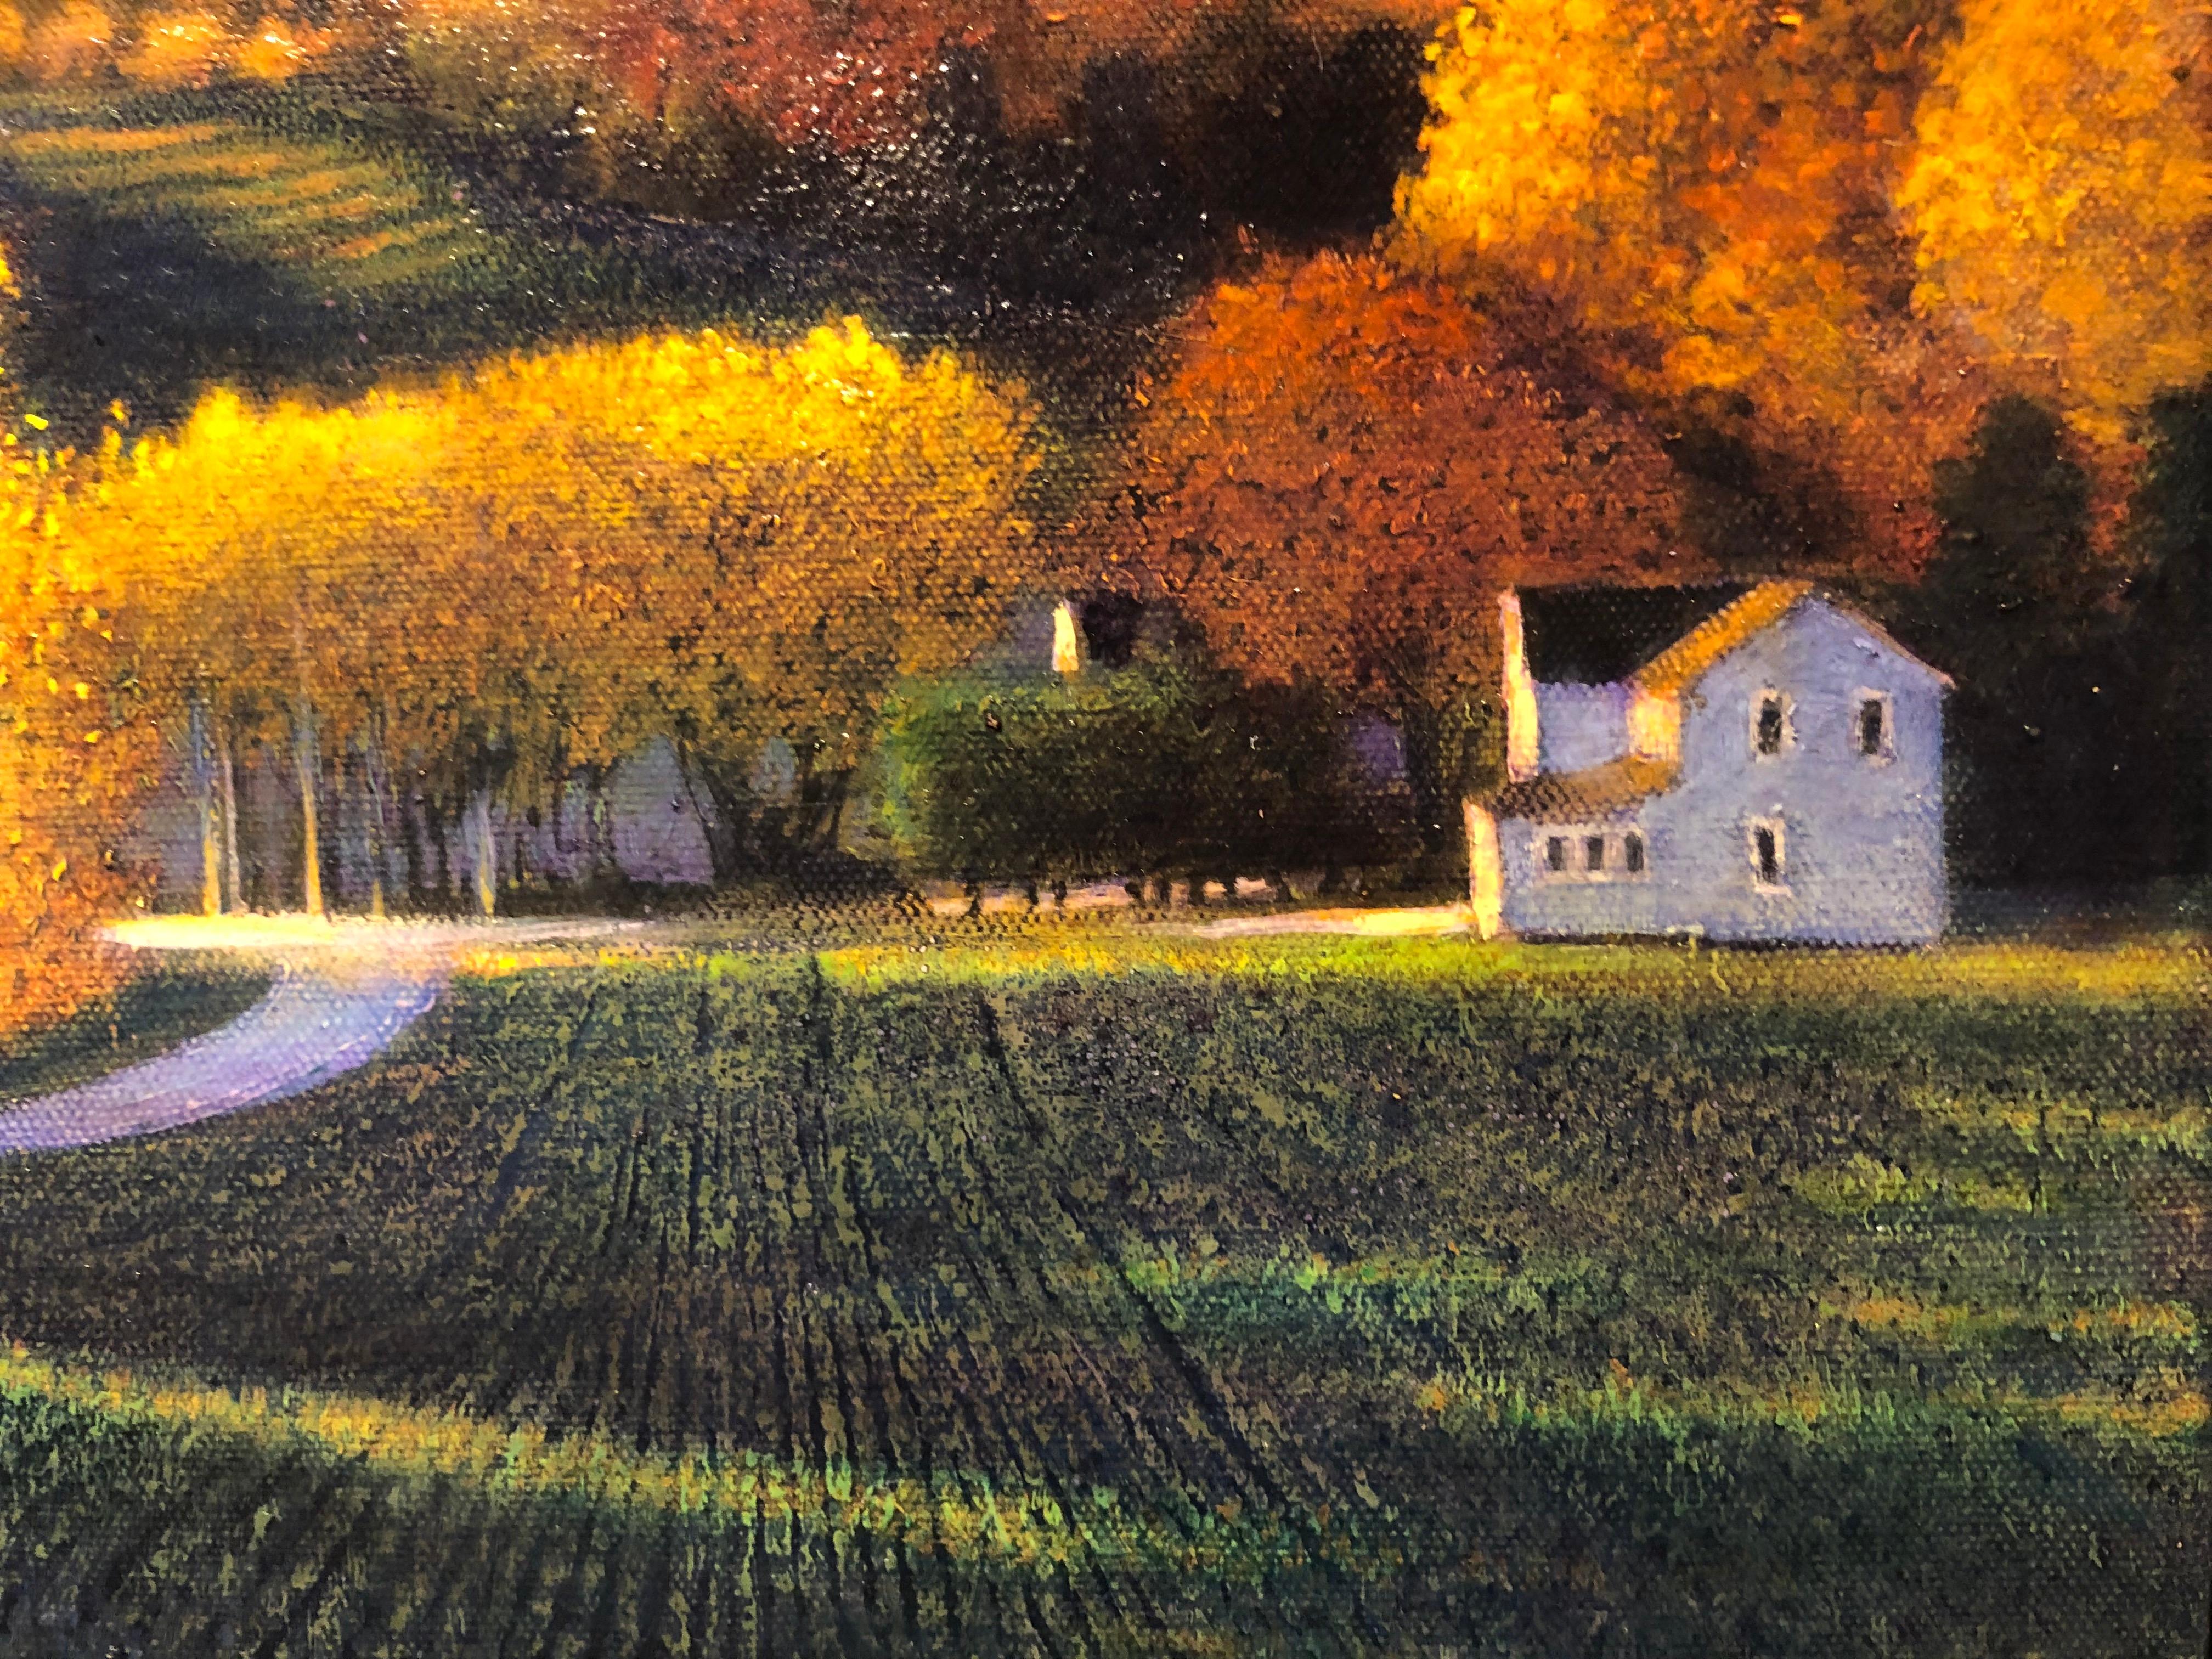 The Color of Home, Original Oil Painting, Glowing Autumn Foliage on Country Road 8